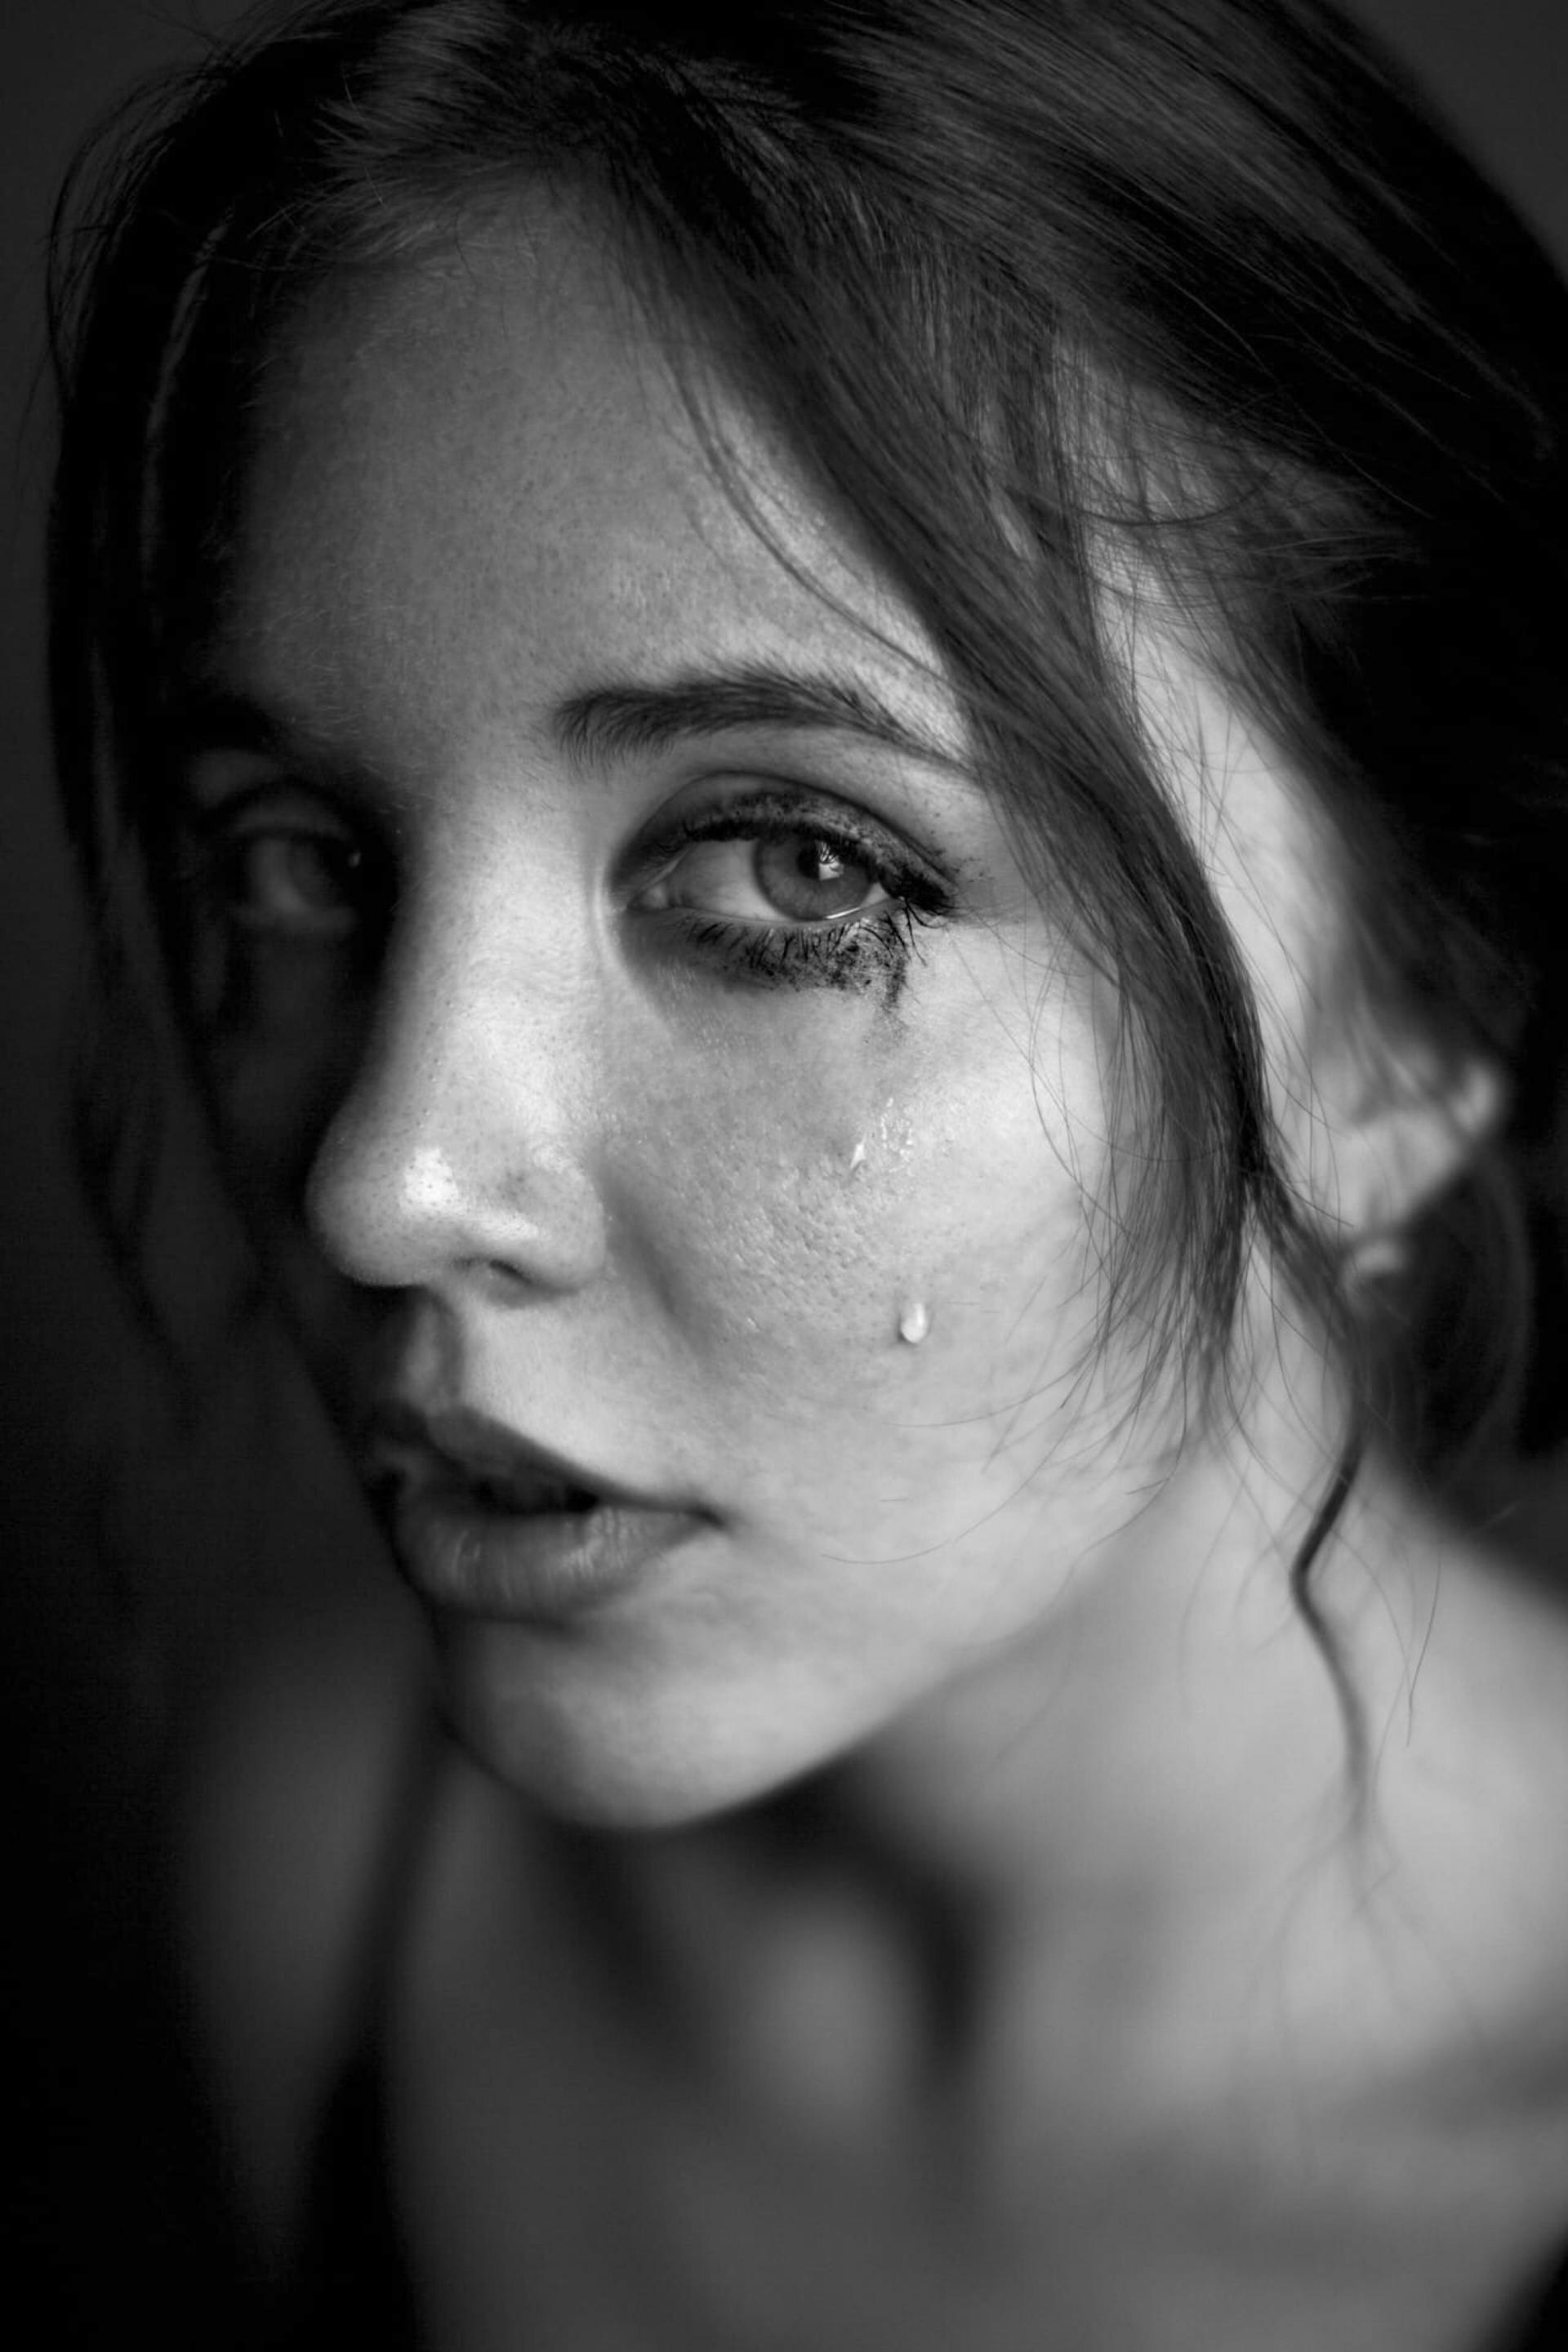 A grayscale photo of a woman crying | Source: Pexels